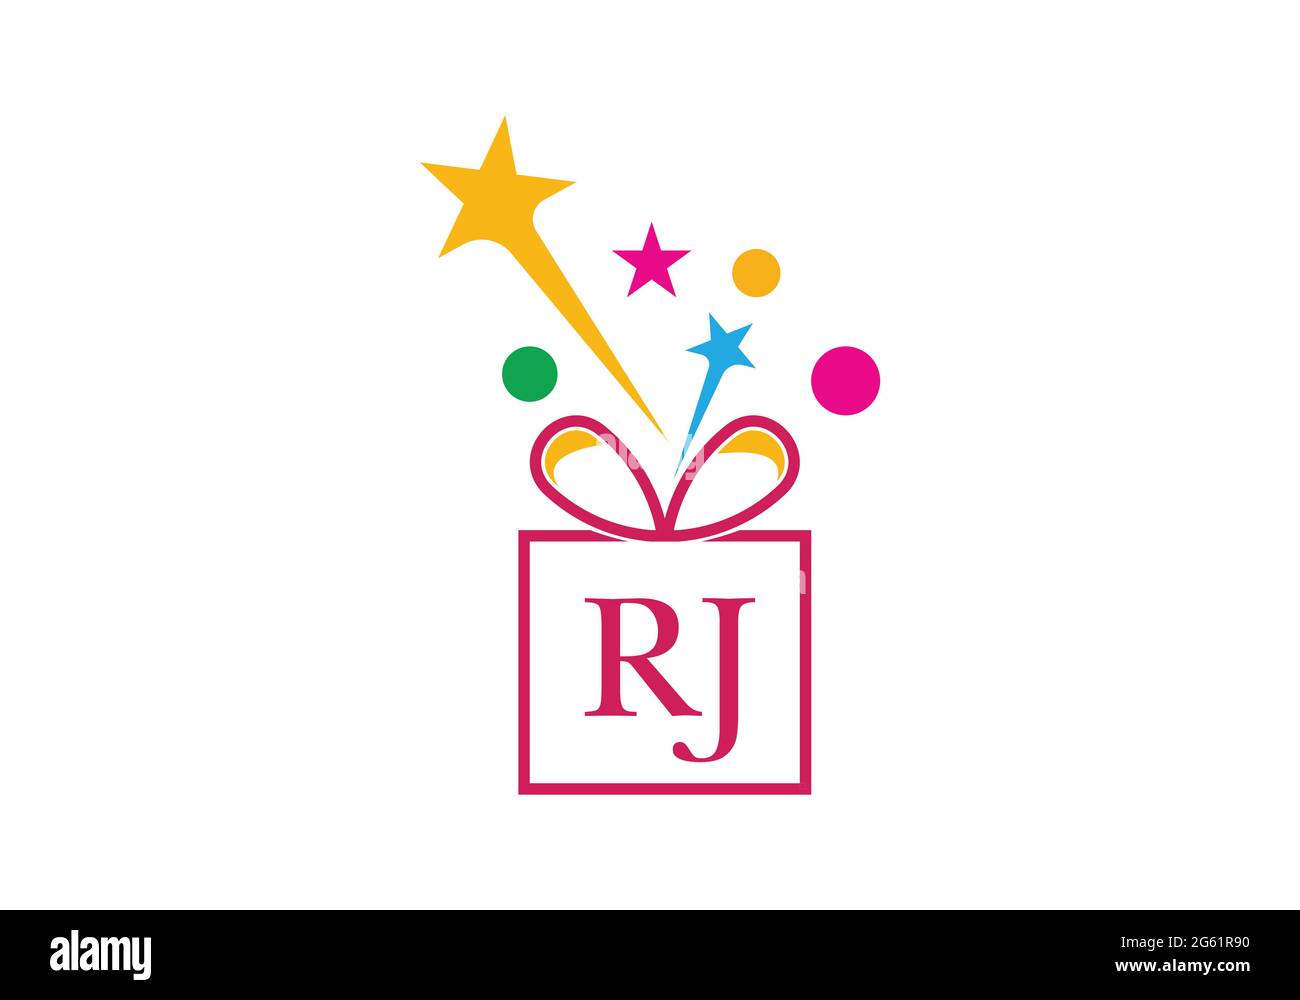 Gift Box, gift shop letter alphabet R J logo icon for Luxury brand design for wedding invitations, greeting card, logo, and other design. Stock Vector